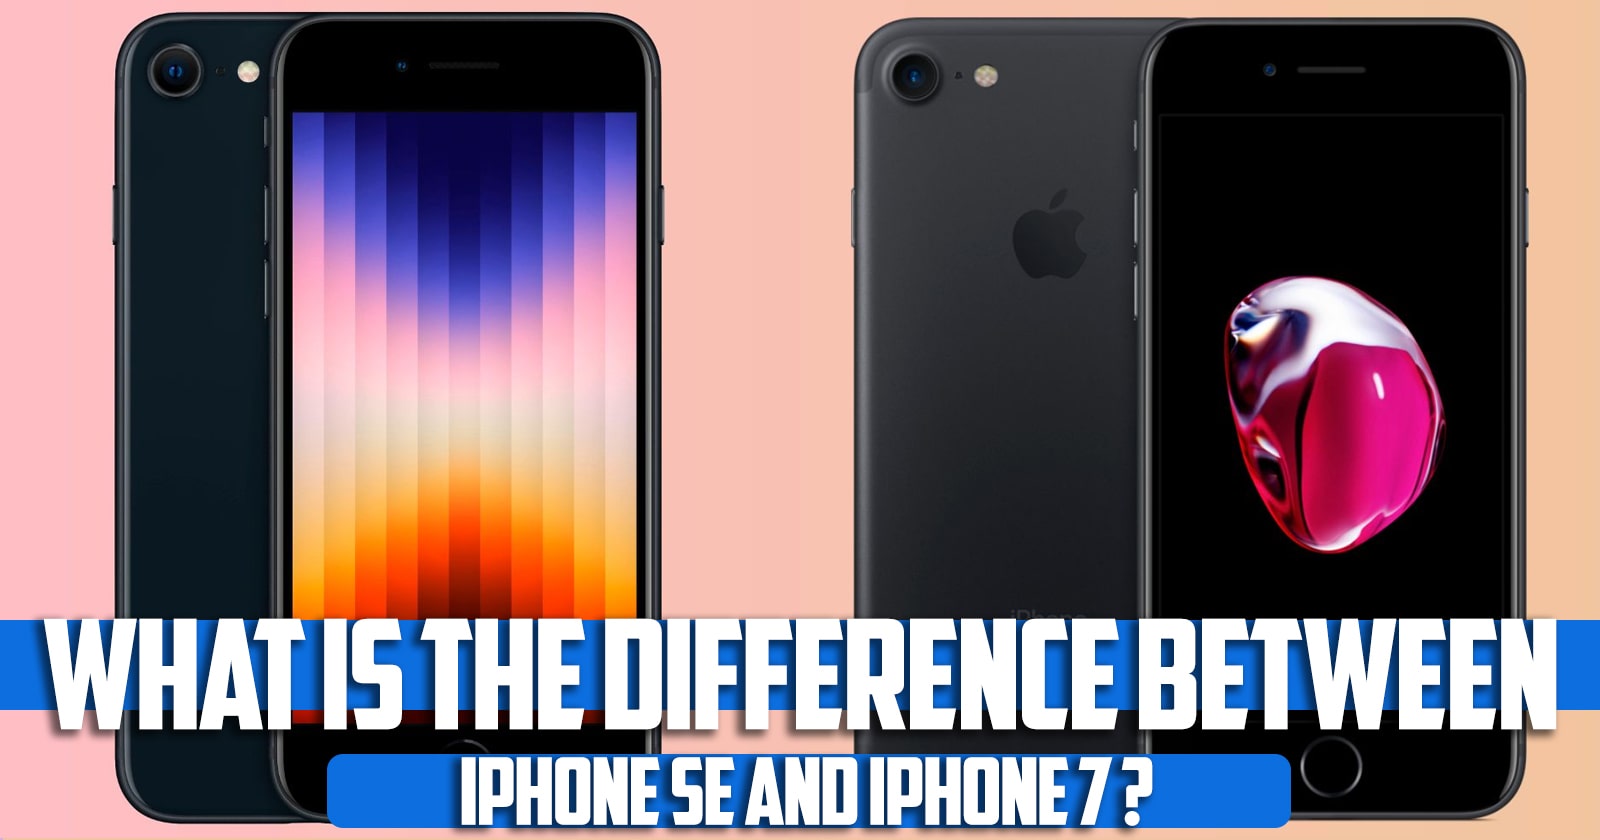 What is the difference between iPhone SE and iPhone 7?